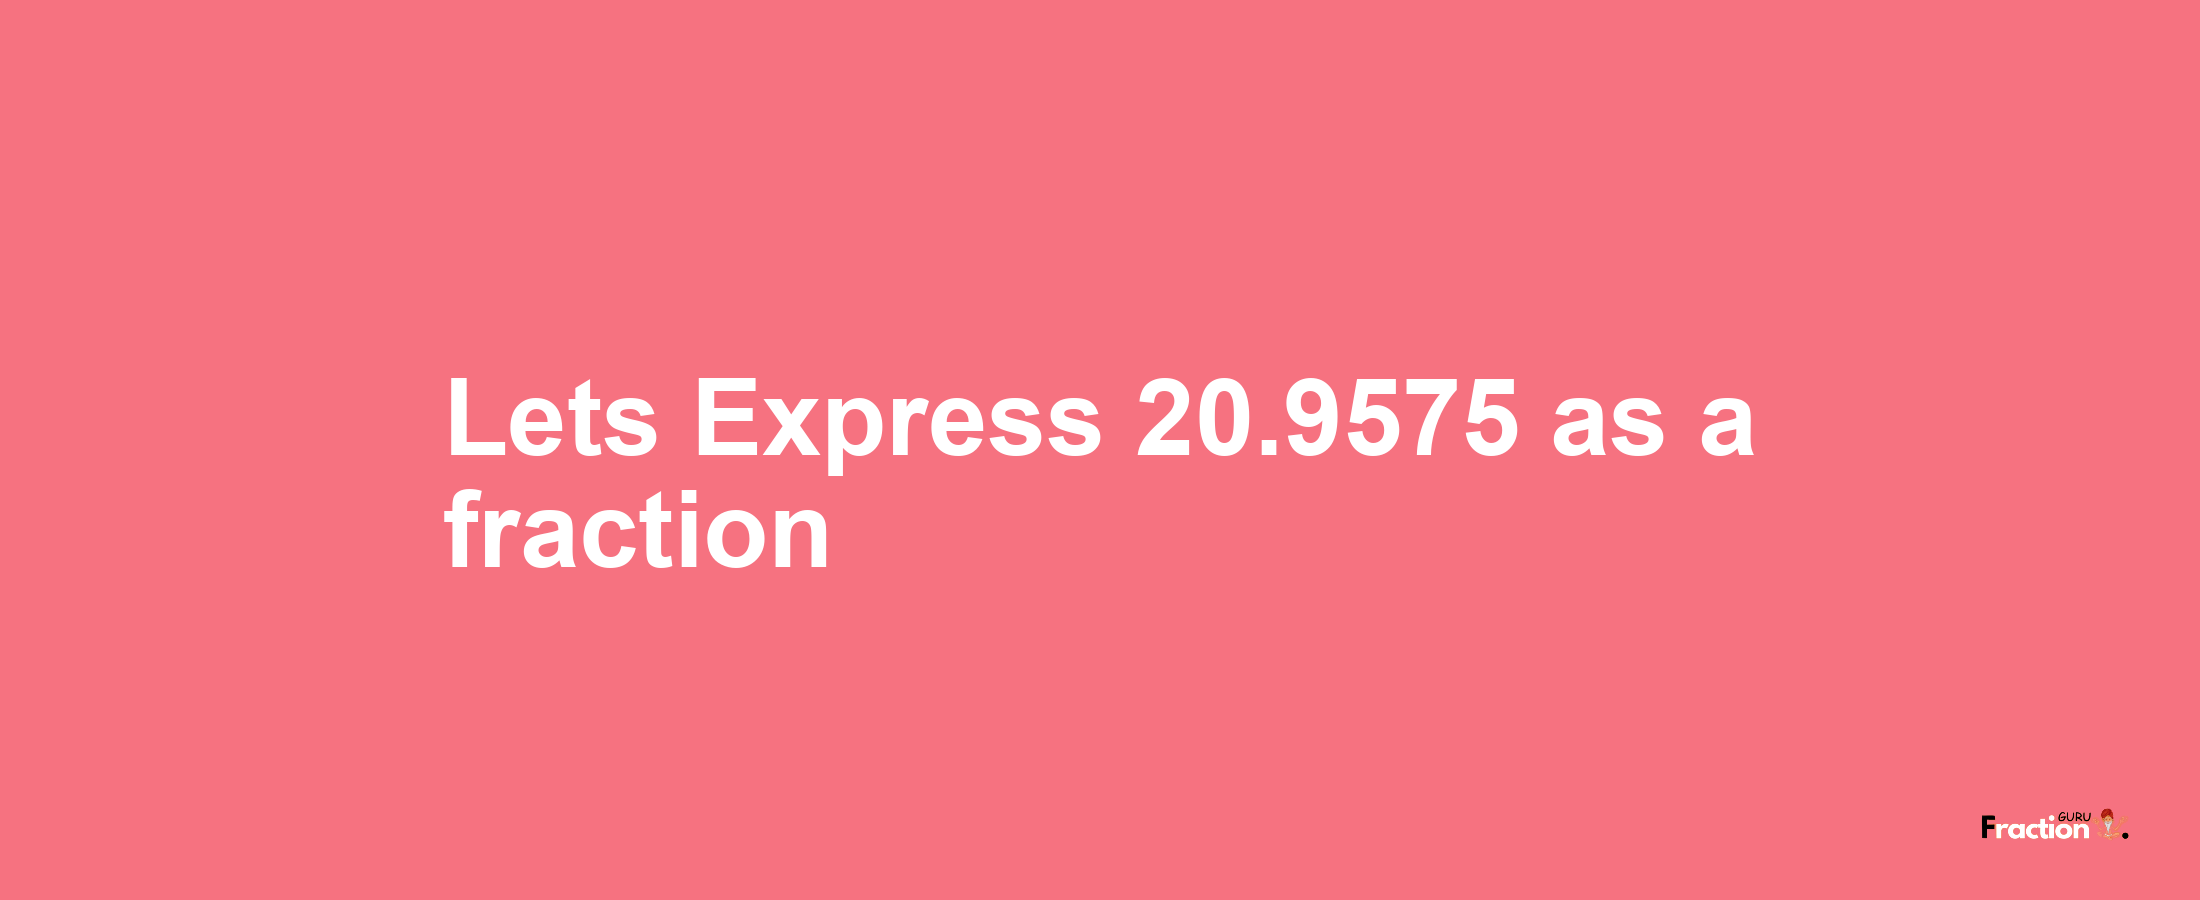 Lets Express 20.9575 as afraction